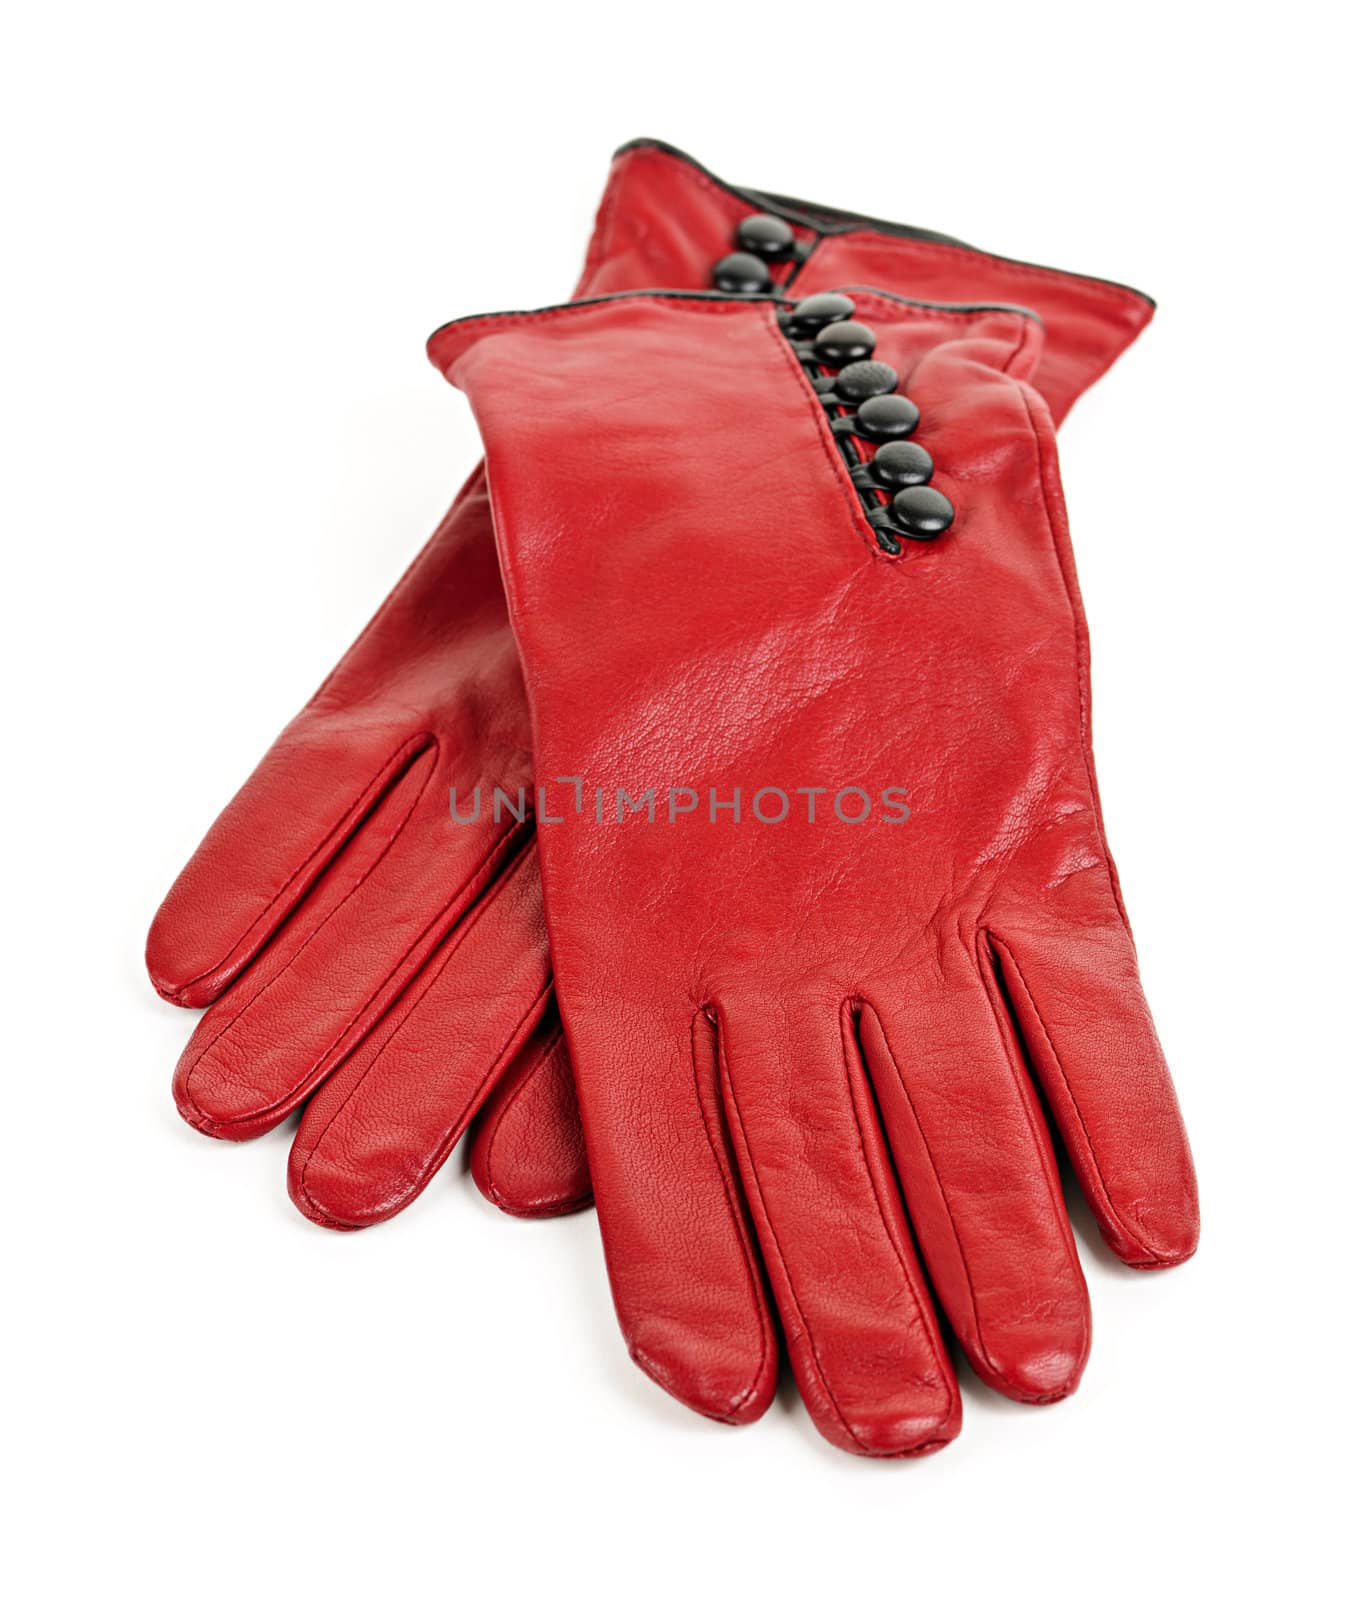 Red leather gloves by elenathewise